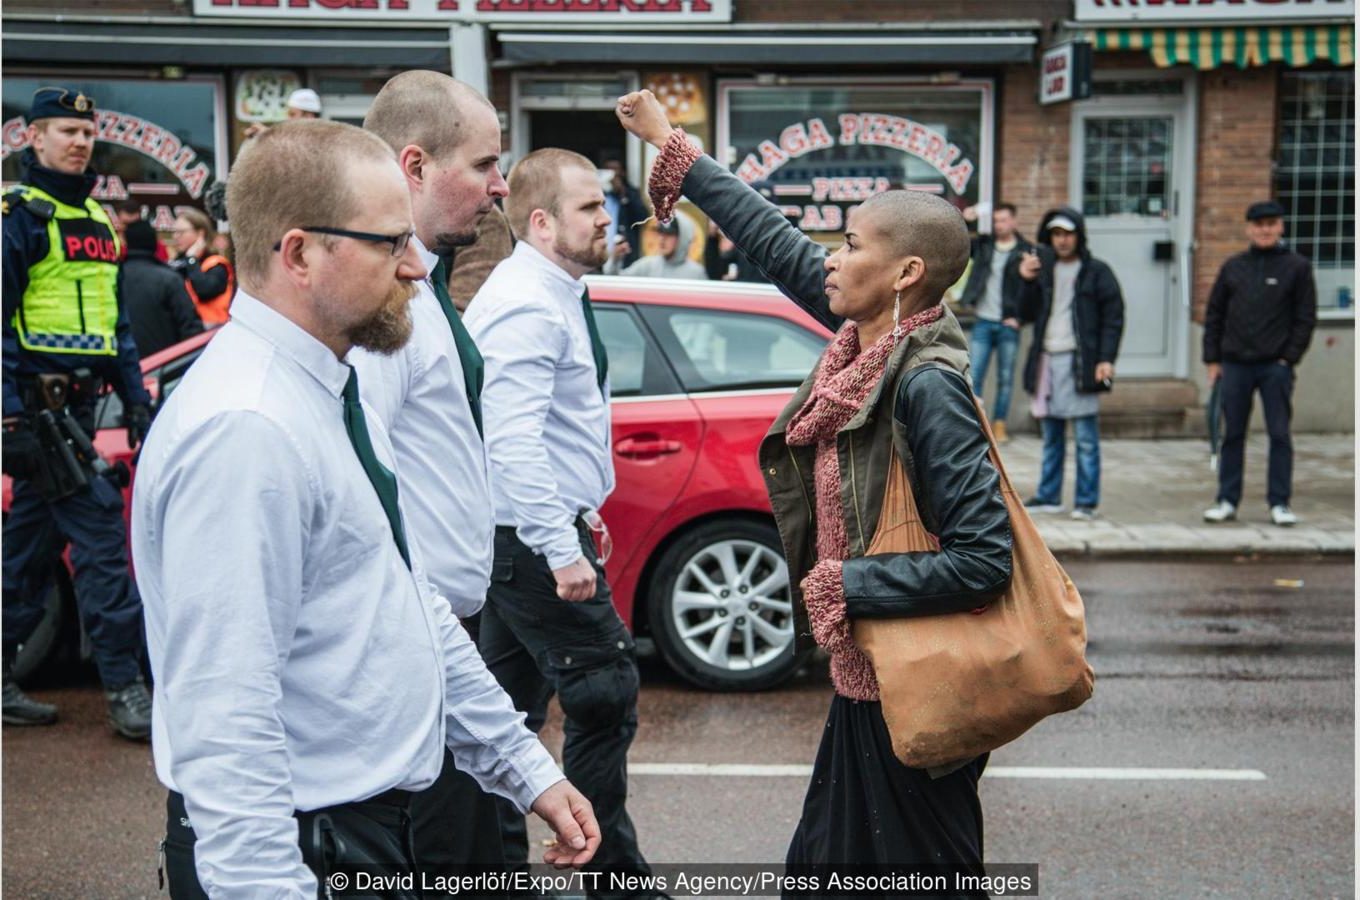 2016 - Tess Asplund confronting the Nordic Resistance Movement in Sweden